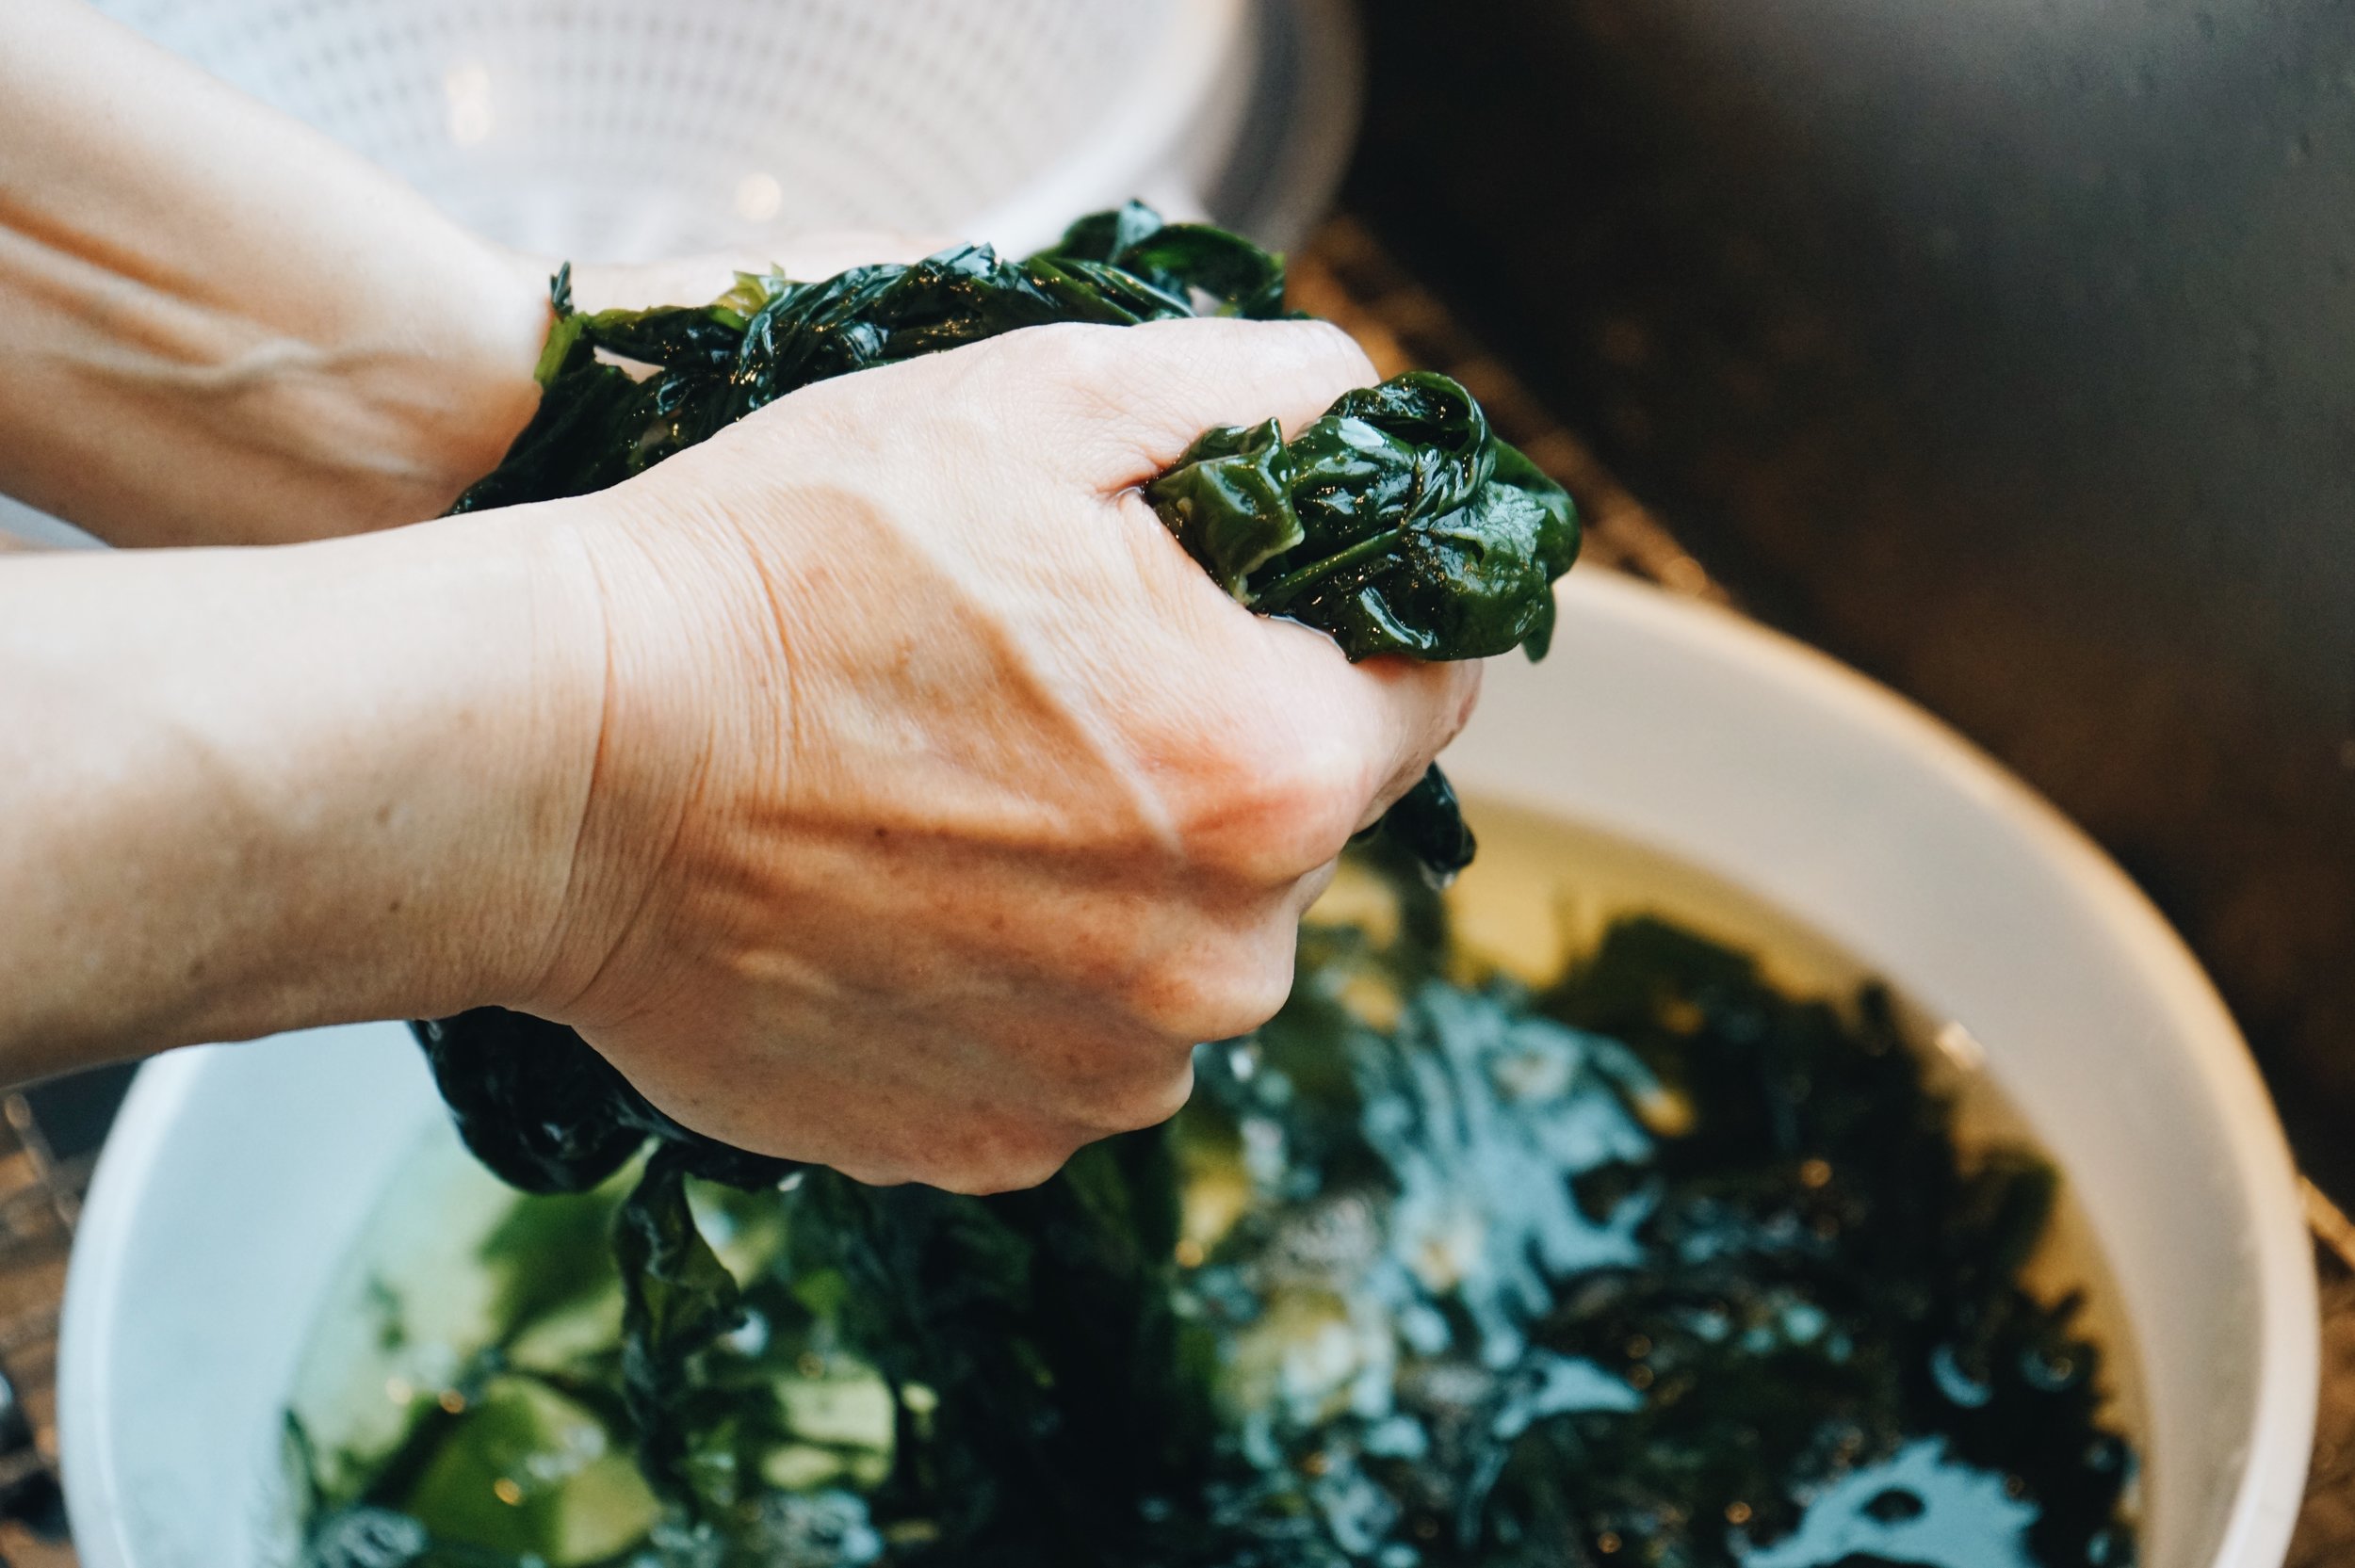 The author's mother washes seaweed to make miyeok-guk (미역국), seaweed soup.